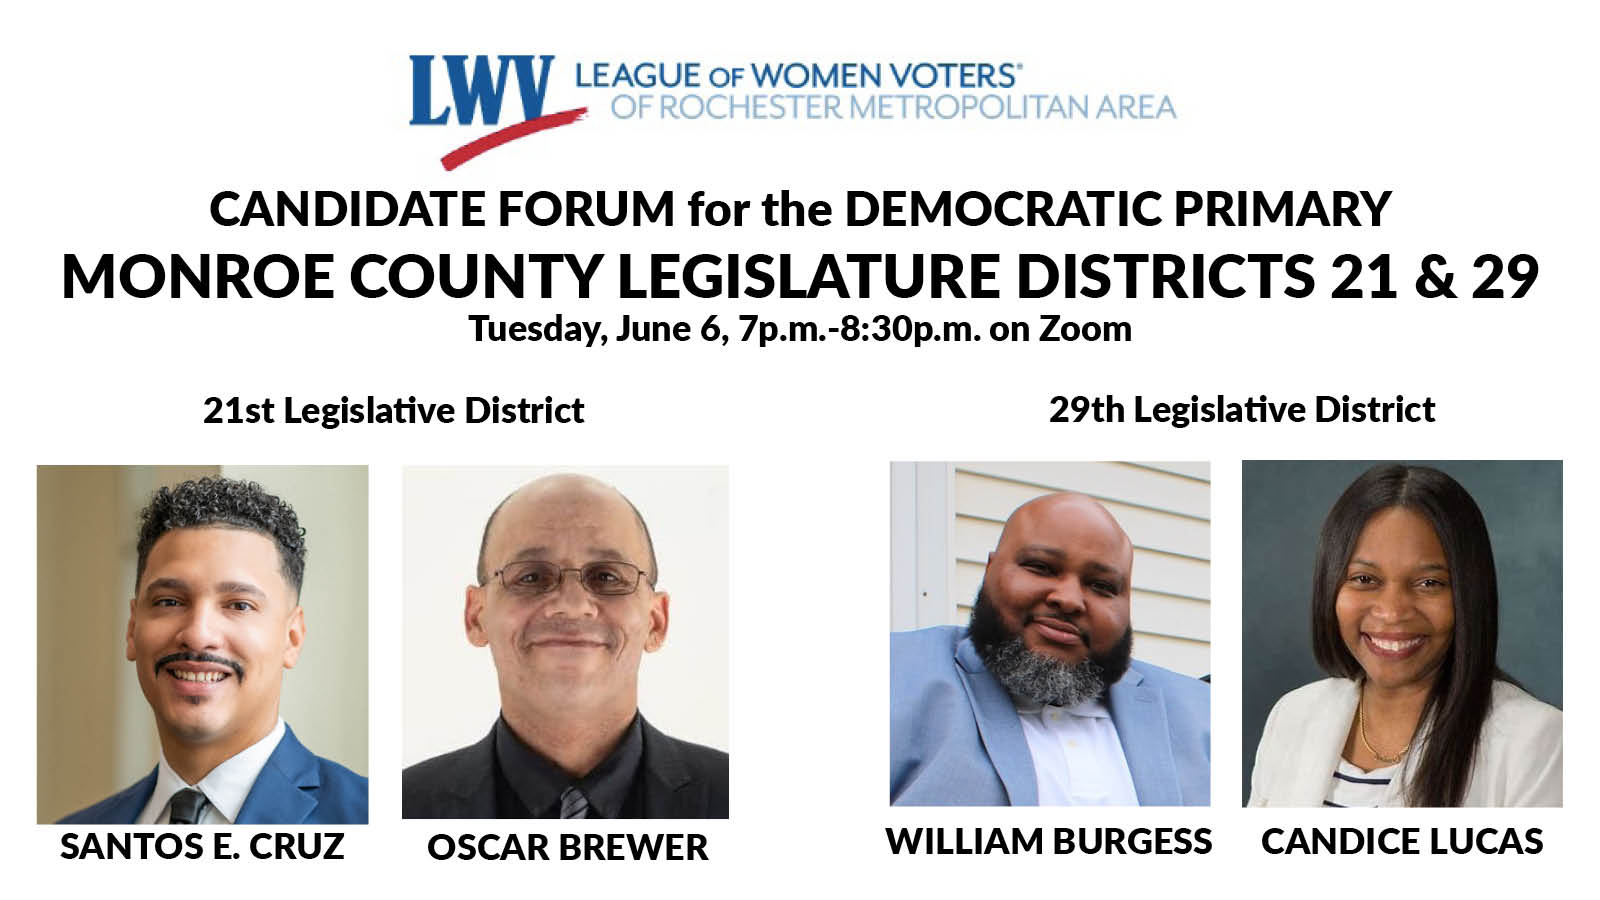 Candidate Forum for the Democratic Primary. Monroe County Legislature Districts 21 & 29. For the 21st district, we'll have Santos Cruz v. Oscar Brewer. For the 29th district, we'll have William Burgess v. Candice Lucas.